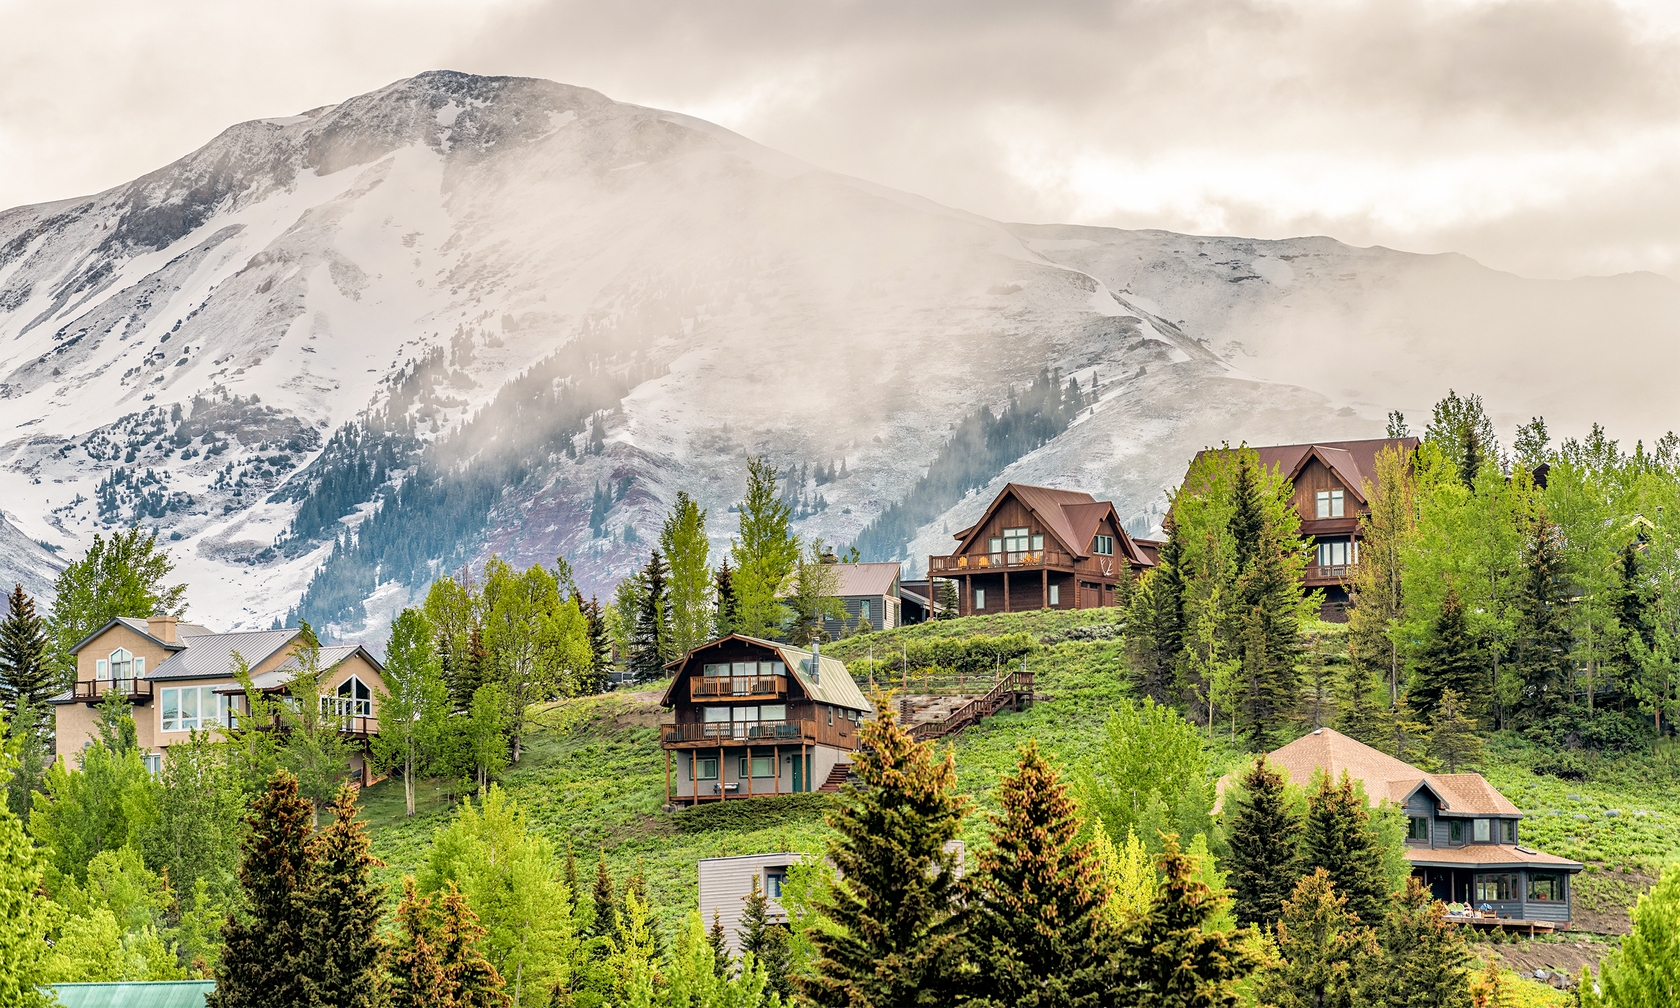 Vacation rentals in Crested Butte